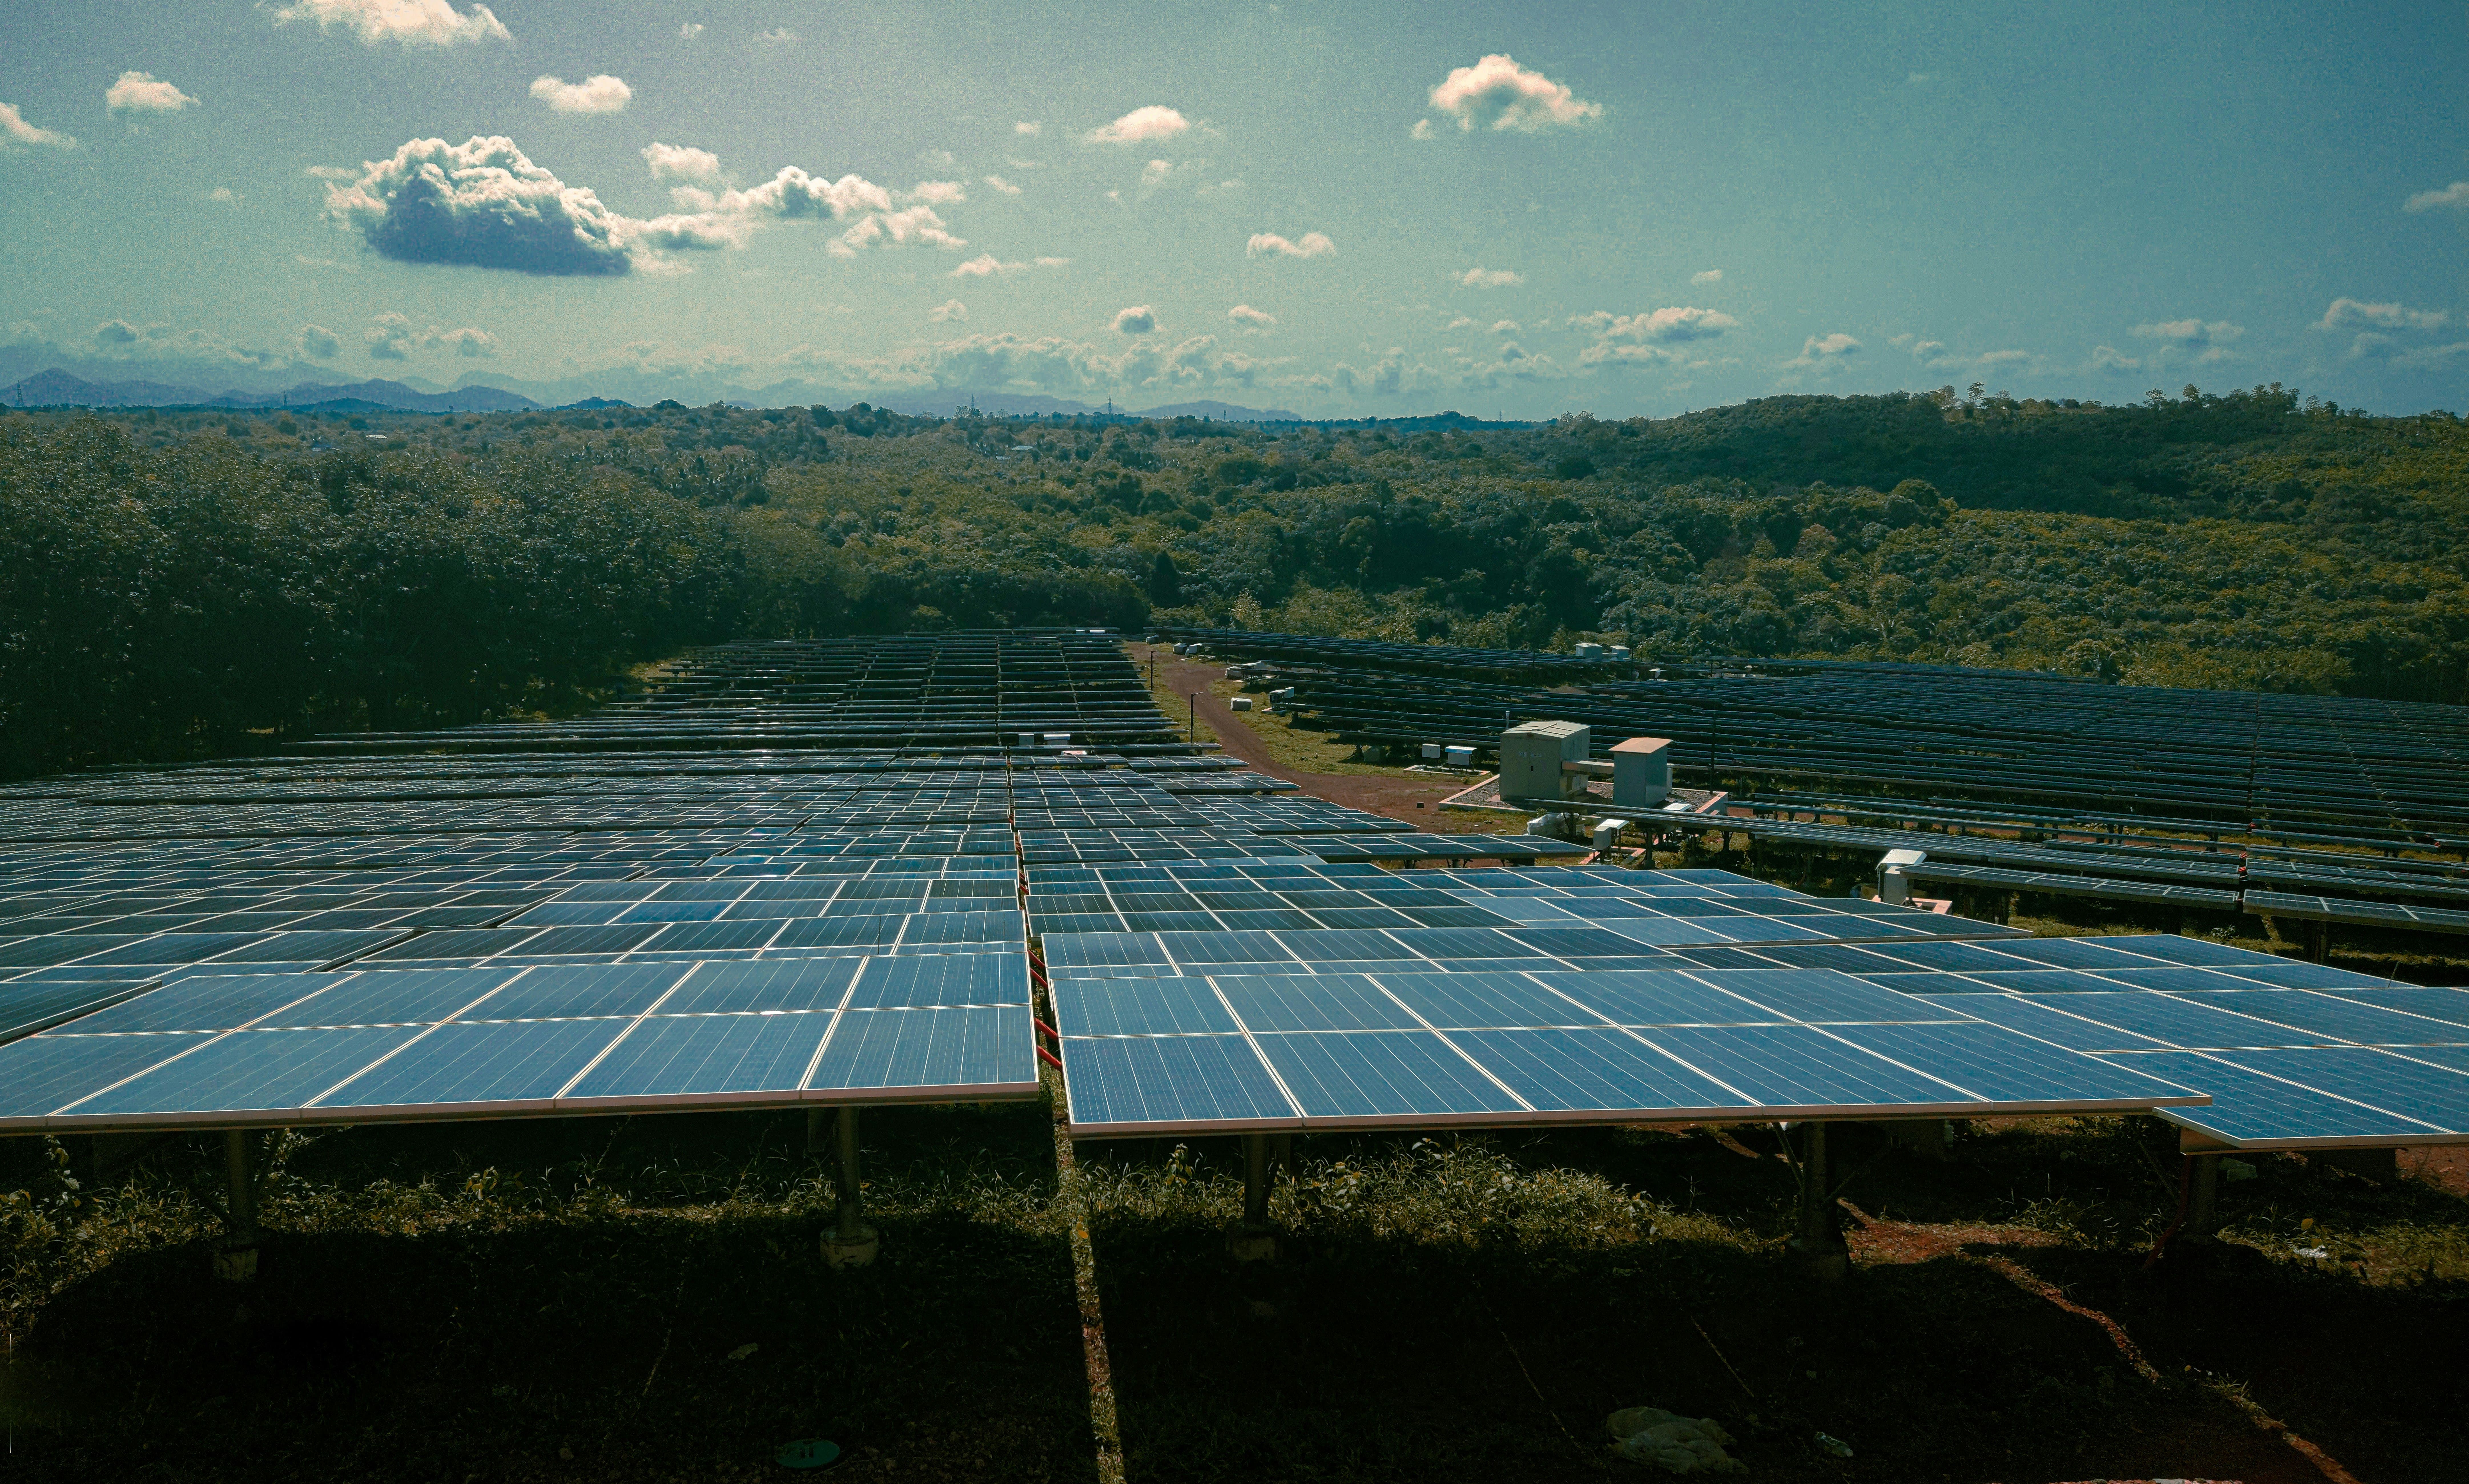 Expansive solar farm in a green, hilly area, illustrating the environmental benefits and large-scale implementation of commercial solar panels.